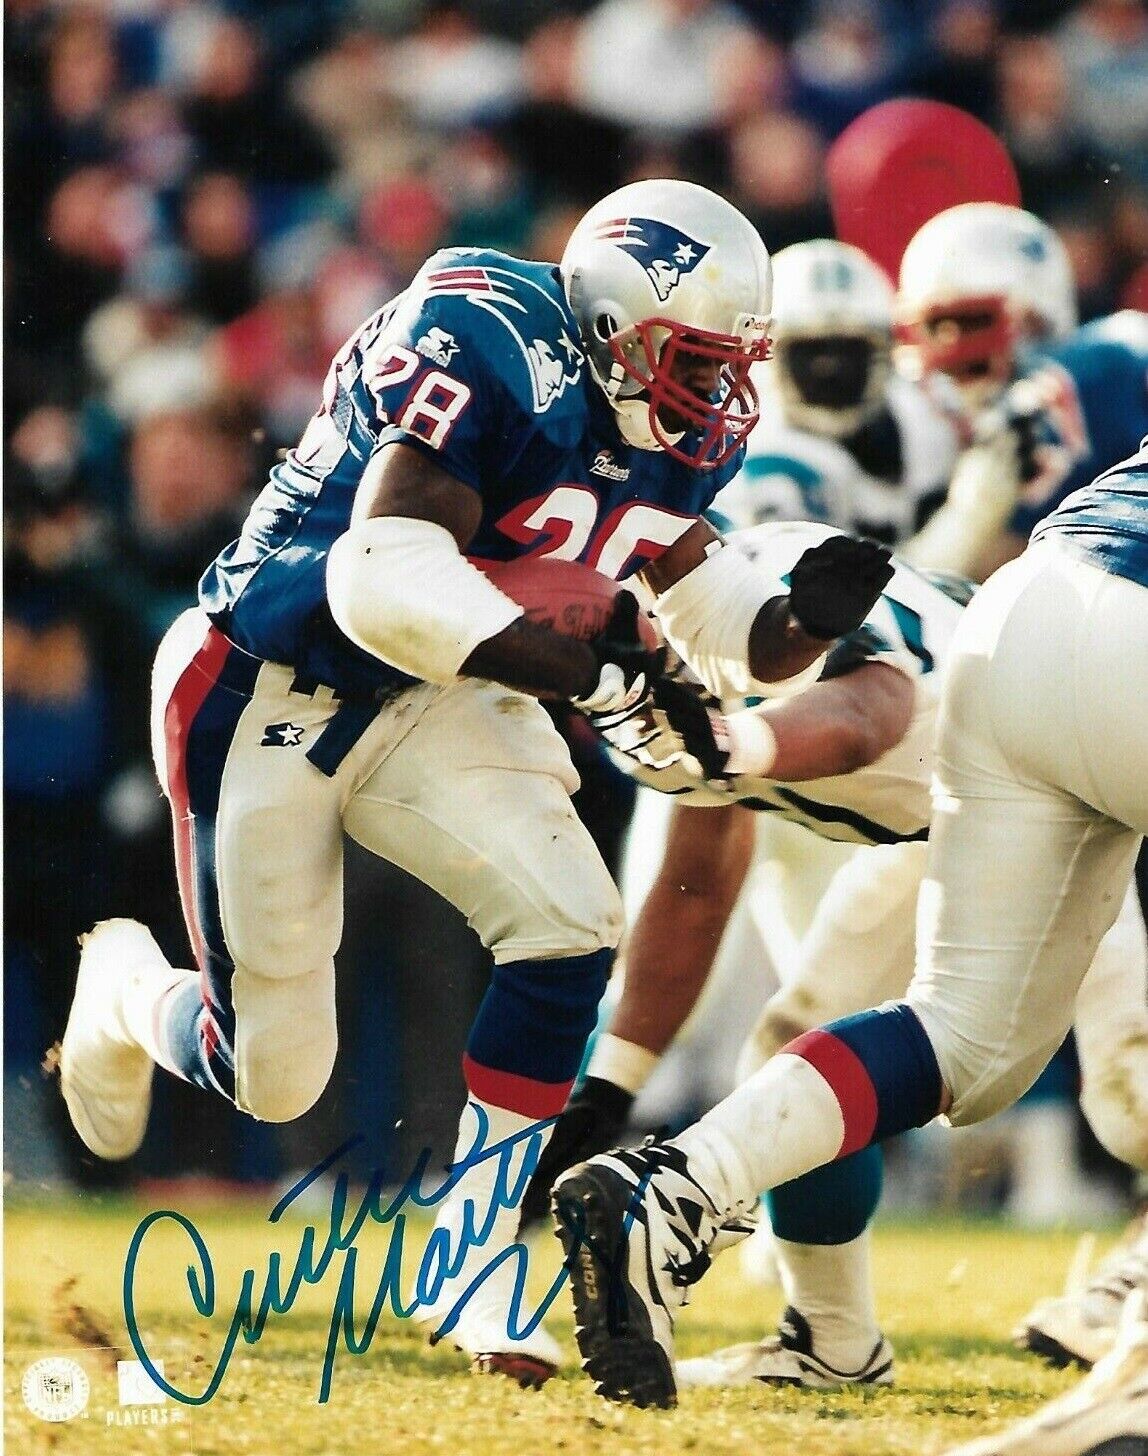 Curtis Martin Autographed Signed 8x10 Photo Poster painting ( Patriots ) REPRINT